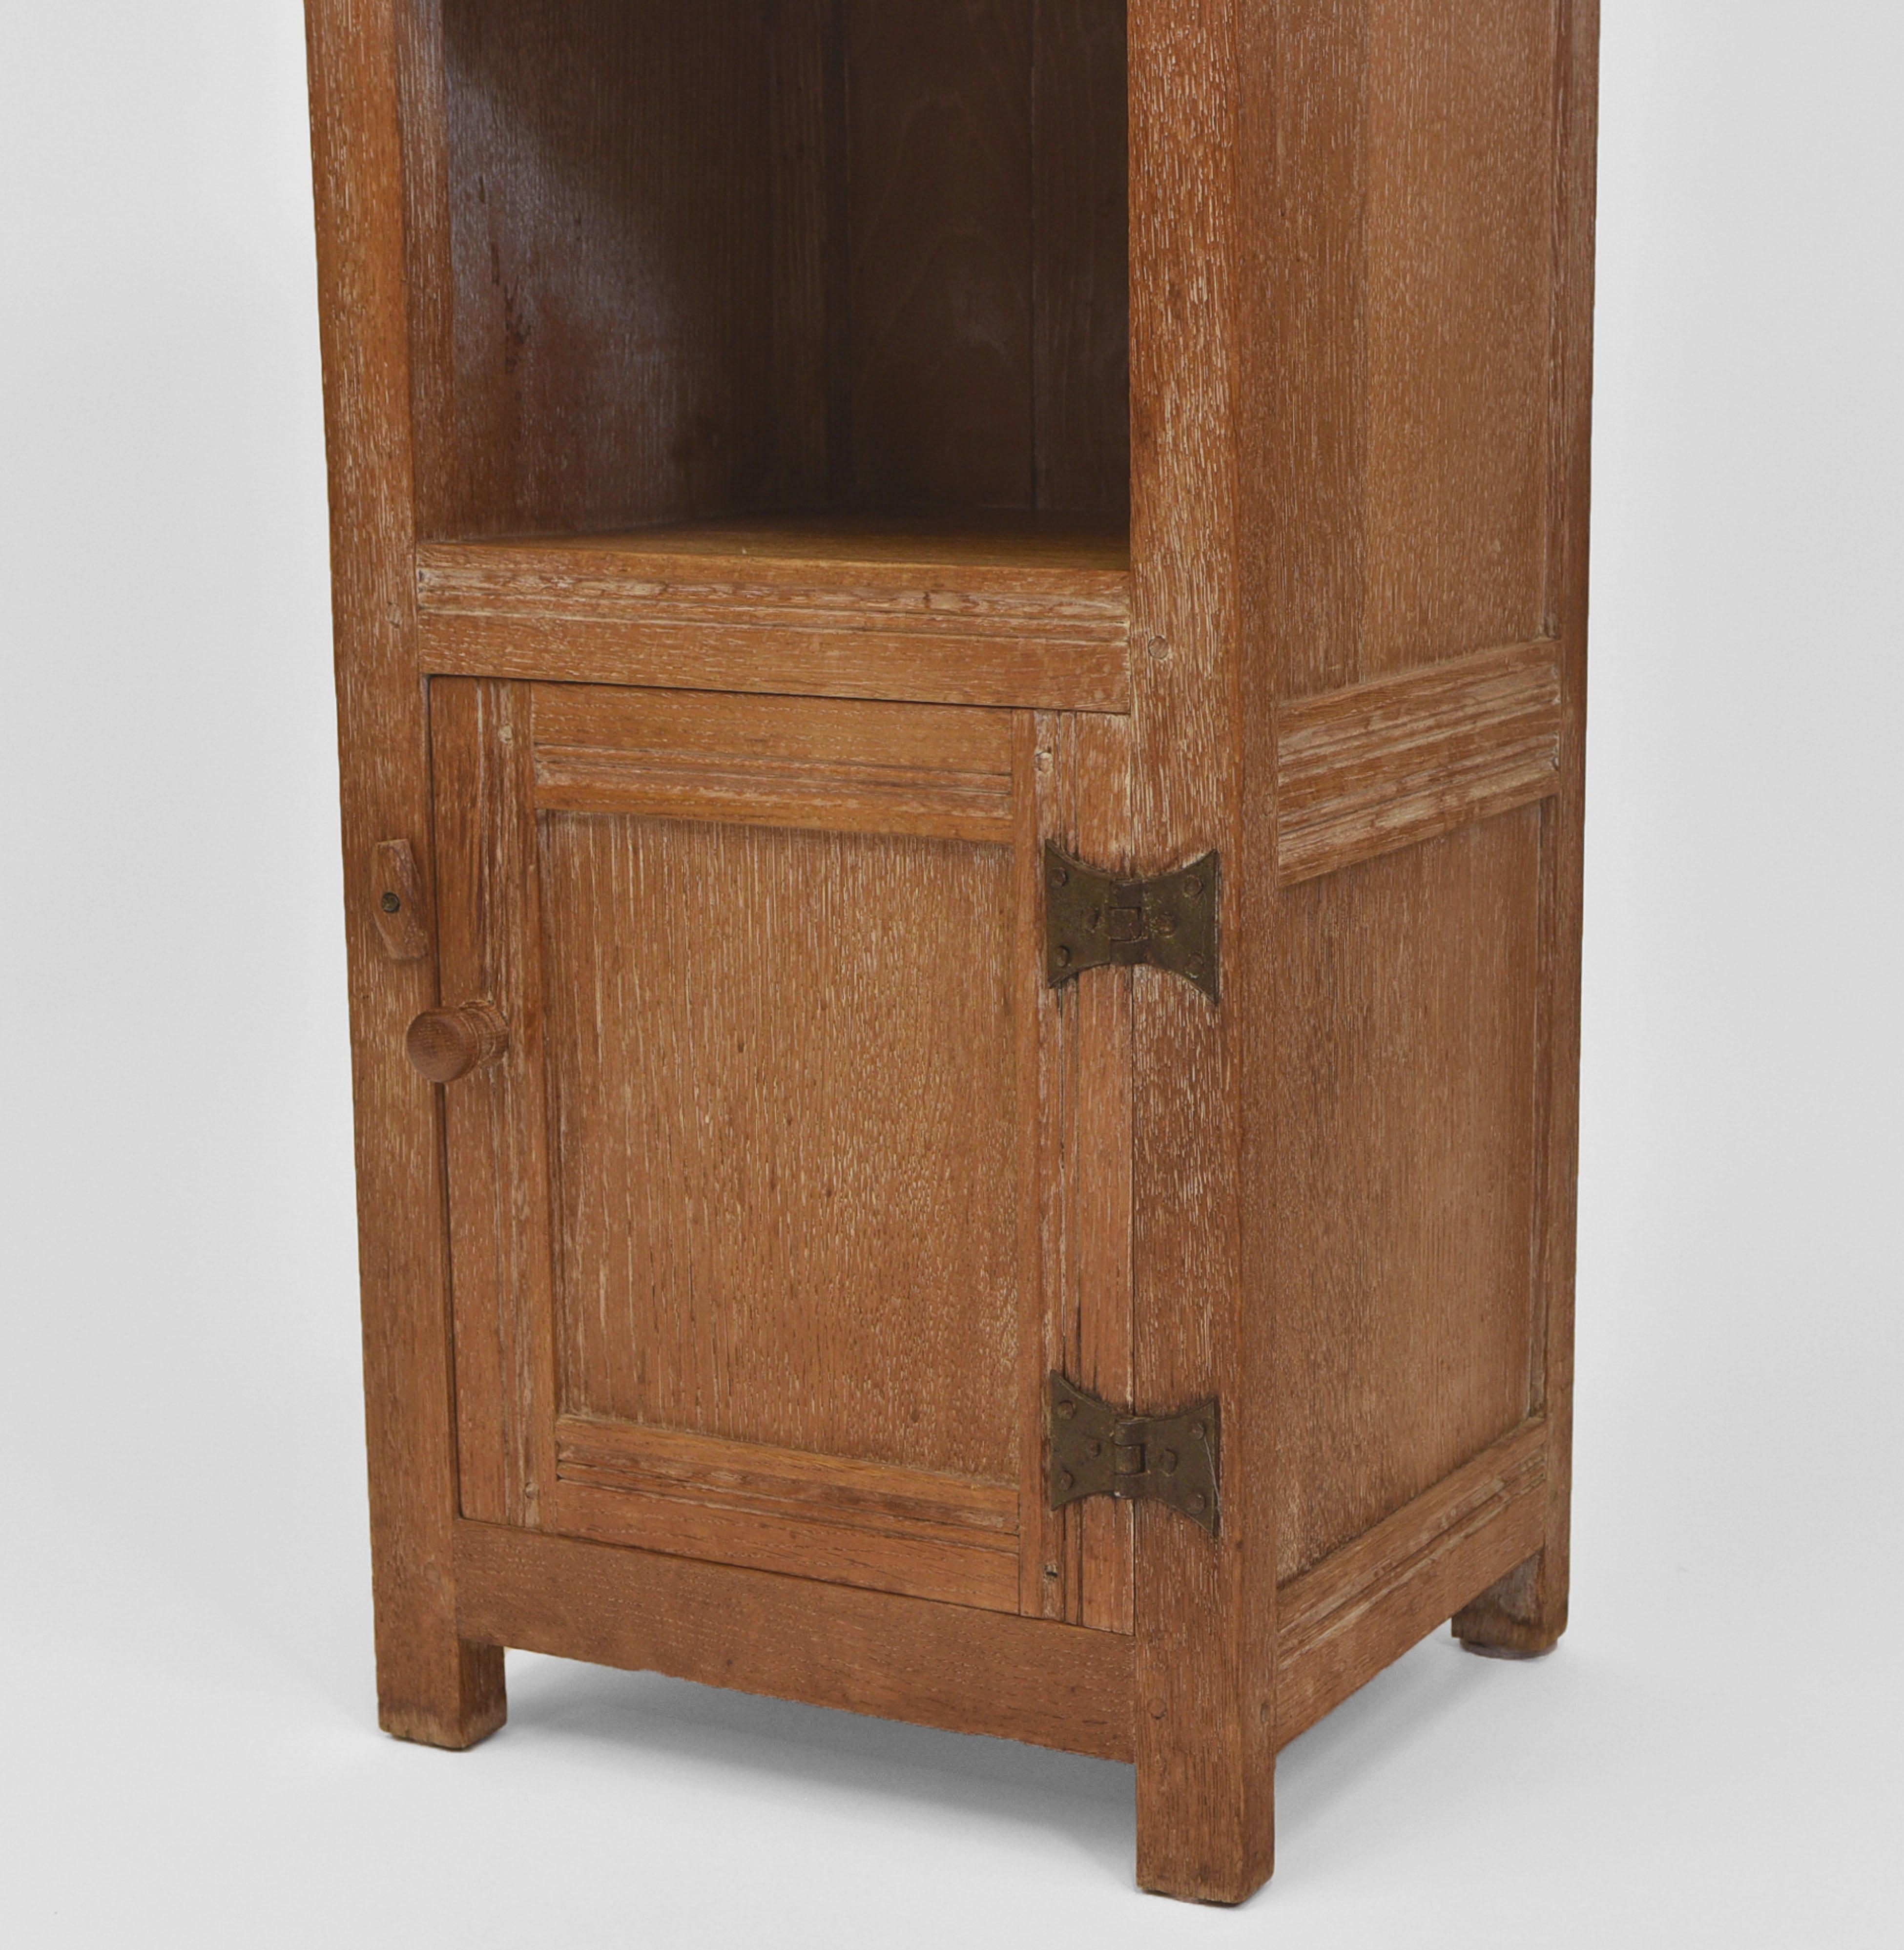 Limed oak bedside cabinet by Heal & Son. Circa late 1930's.

Superbly made, with each join having dowel construction, forged iron exposed cabinet door hinges. Made in solid oak with inner fielded sides and door panel. The back is tongue and grooved